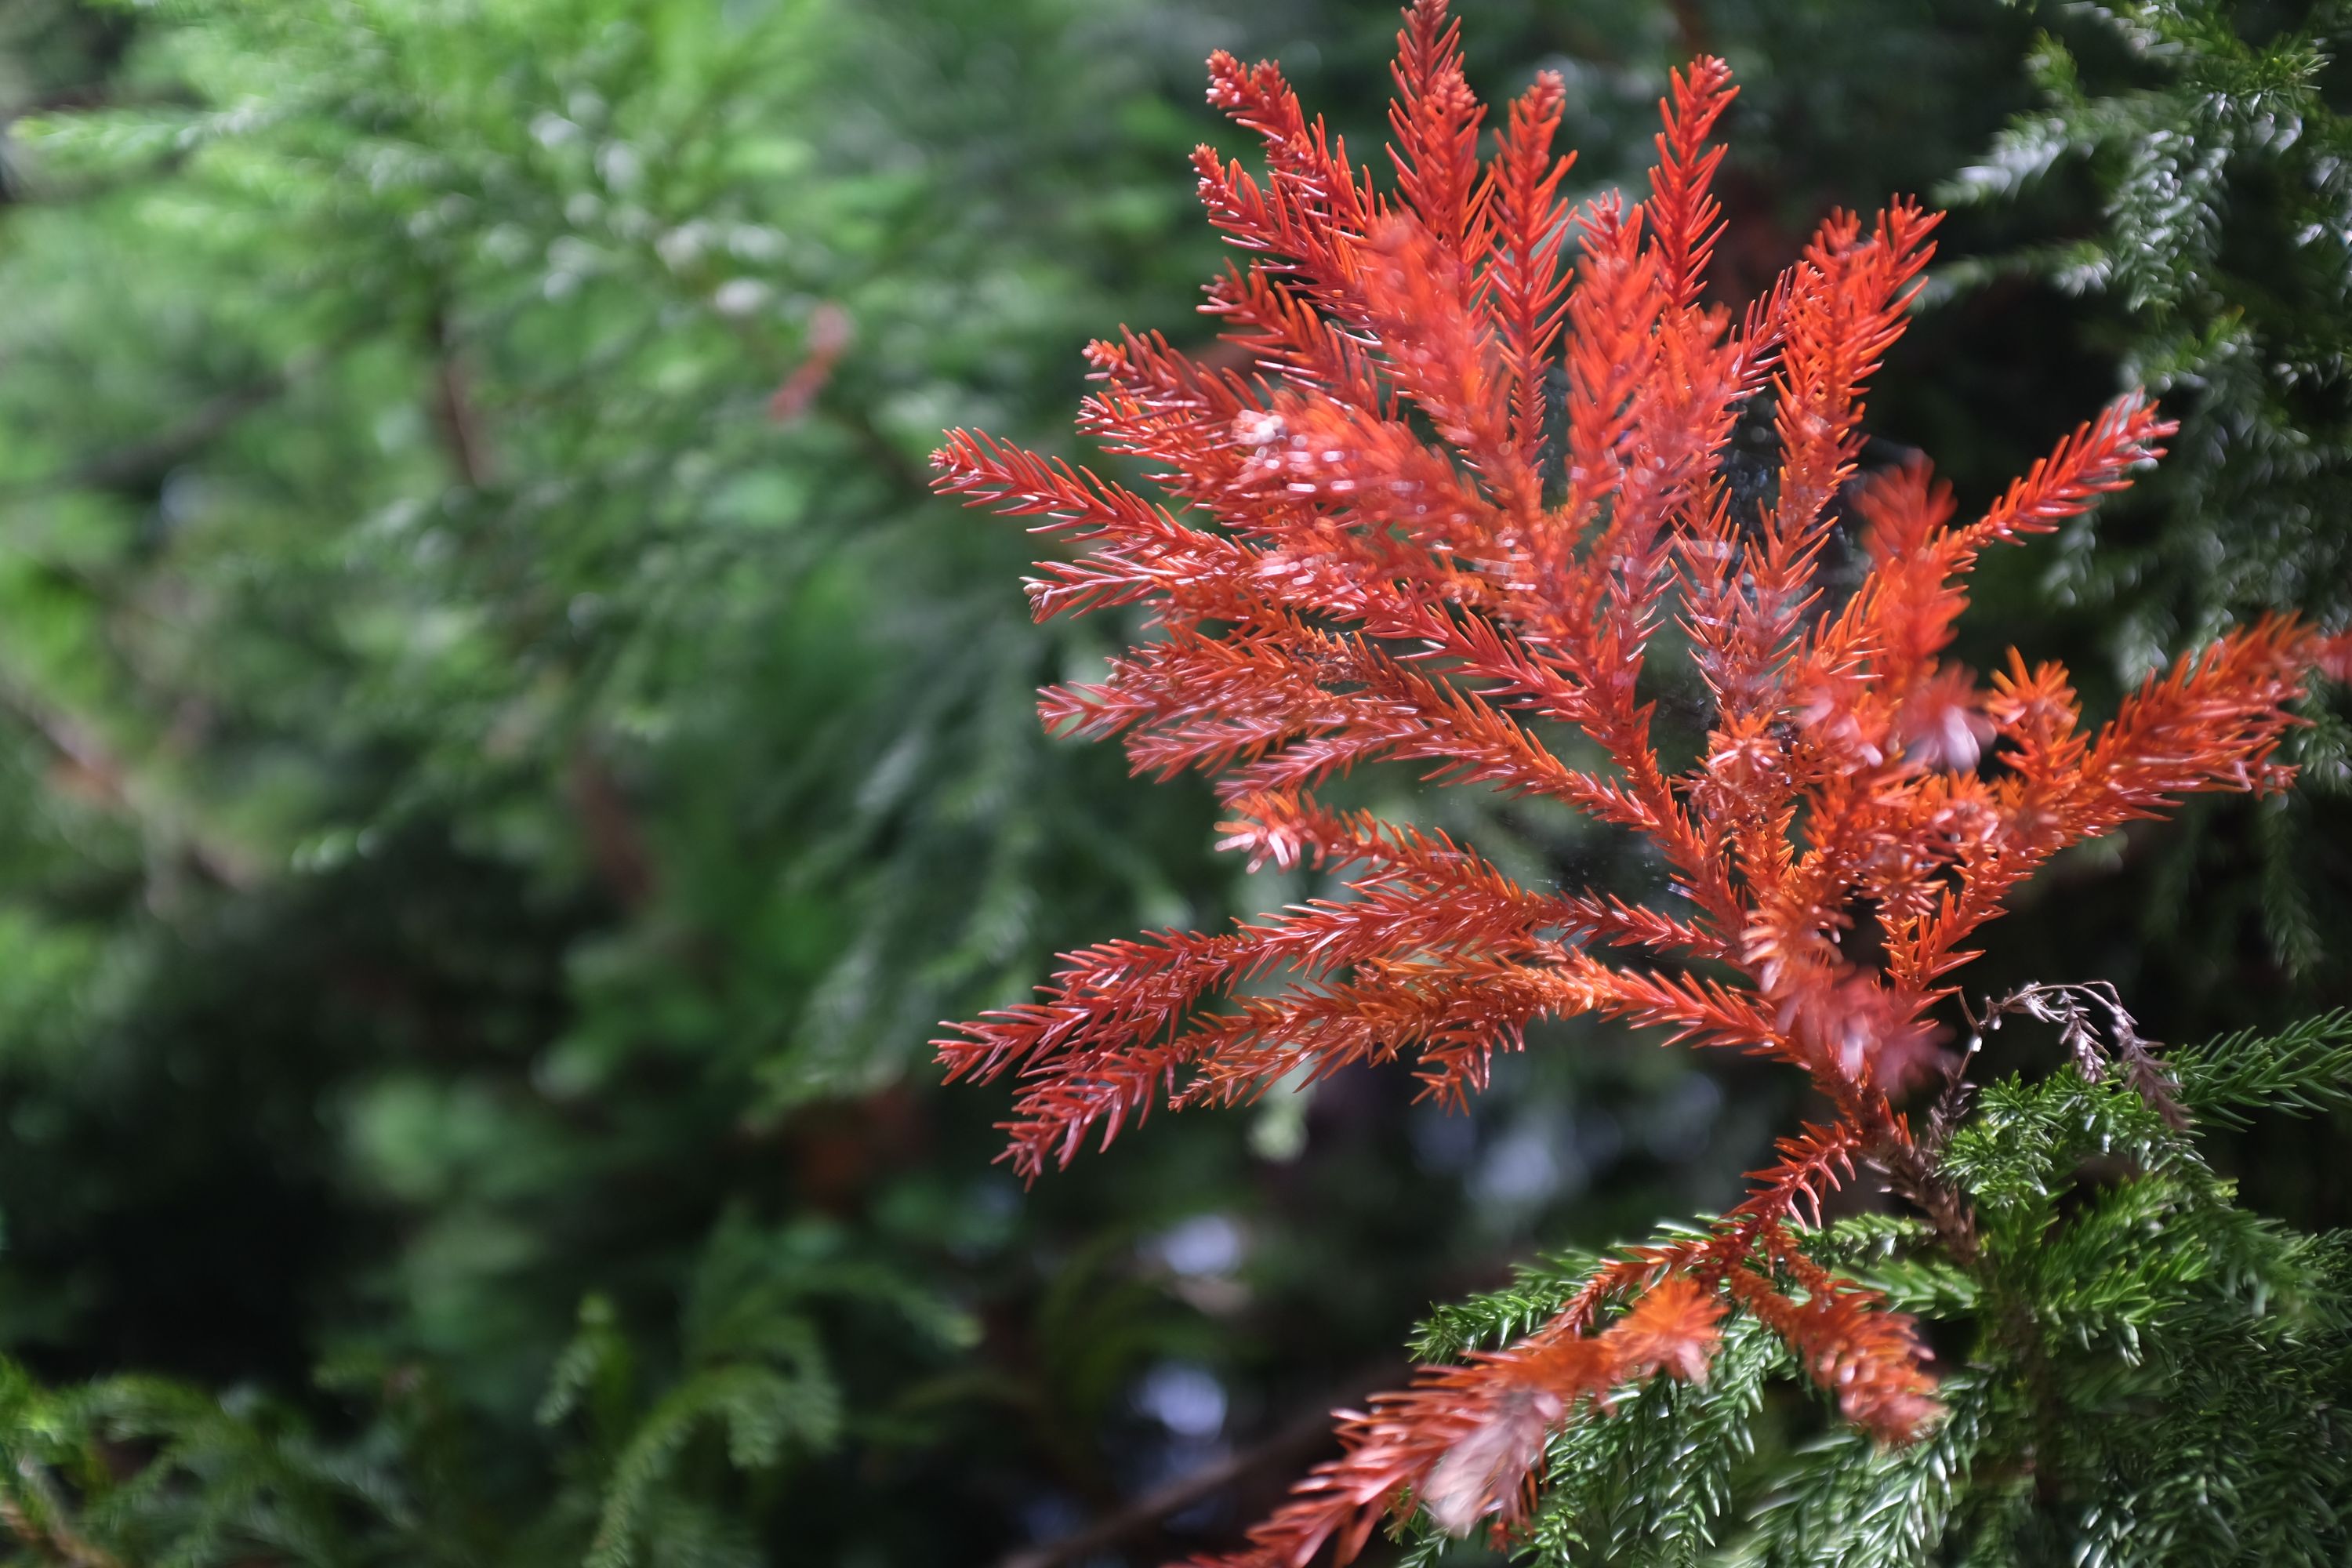 A bright red branch of an evergreen plant.